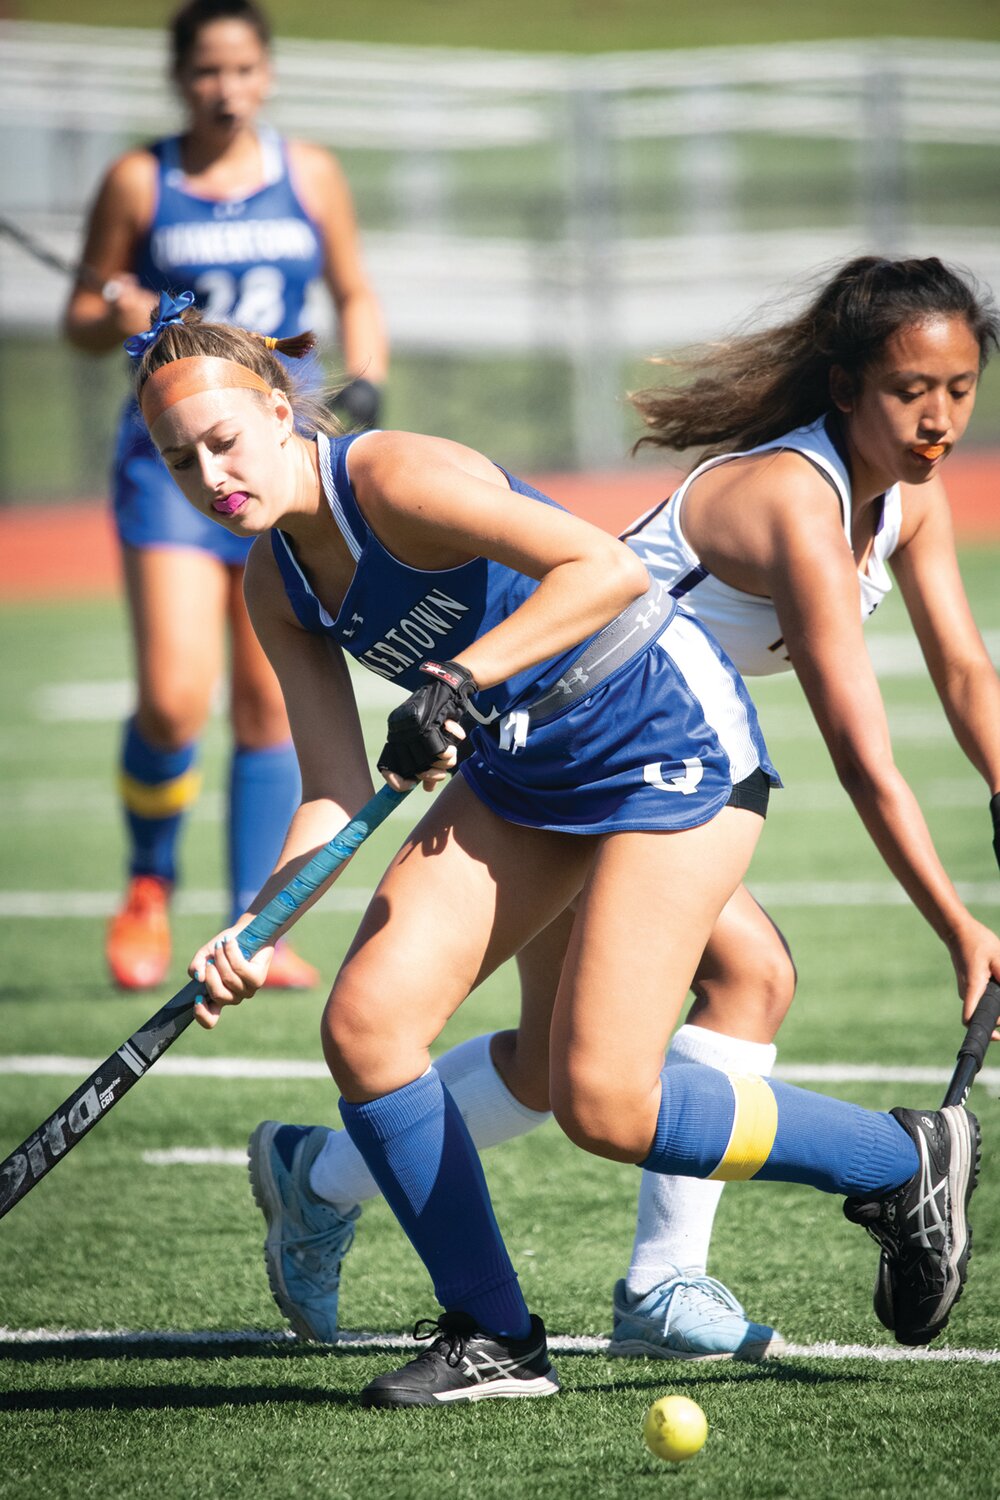 Quakertown’s Kiera Gallagher chases after the ball.